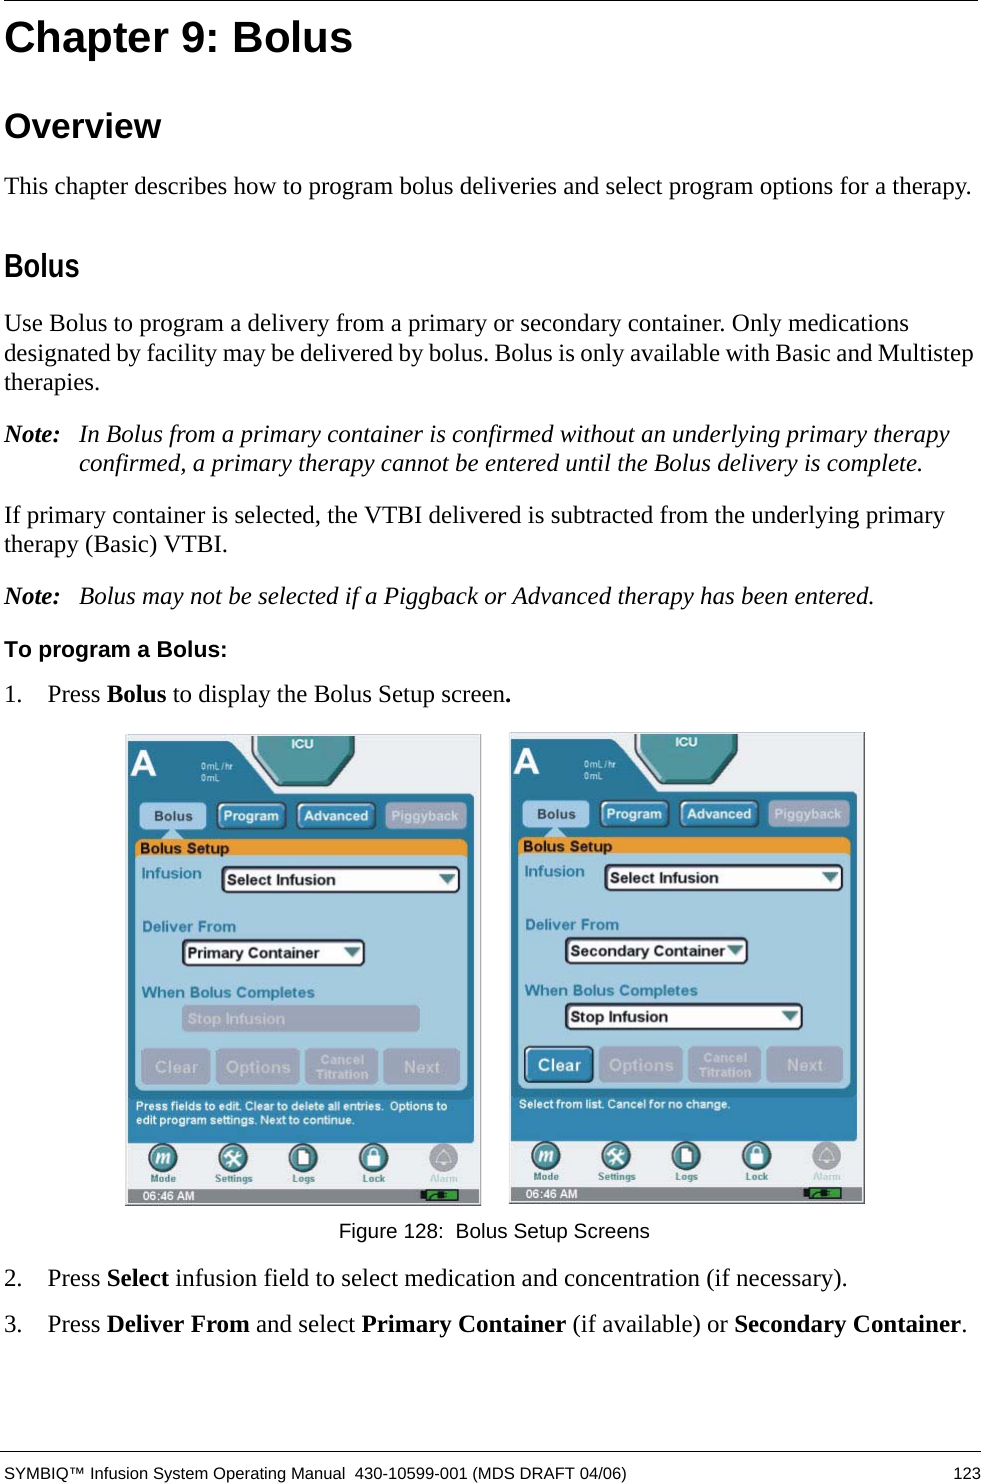  SYMBIQ™ Infusion System Operating Manual  430-10599-001 (MDS DRAFT 04/06) 123Chapter 9: BolusOverviewThis chapter describes how to program bolus deliveries and select program options for a therapy. BolusUse Bolus to program a delivery from a primary or secondary container. Only medications designated by facility may be delivered by bolus. Bolus is only available with Basic and Multistep therapies.Note: In Bolus from a primary container is confirmed without an underlying primary therapy confirmed, a primary therapy cannot be entered until the Bolus delivery is complete. If primary container is selected, the VTBI delivered is subtracted from the underlying primary therapy (Basic) VTBI.Note: Bolus may not be selected if a Piggback or Advanced therapy has been entered.To program a Bolus:1.  Press Bolus to display the Bolus Setup screen. Figure 128:  Bolus Setup Screens2.  Press Select infusion field to select medication and concentration (if necessary).3.  Press Deliver From and select Primary Container (if available) or Secondary Container.